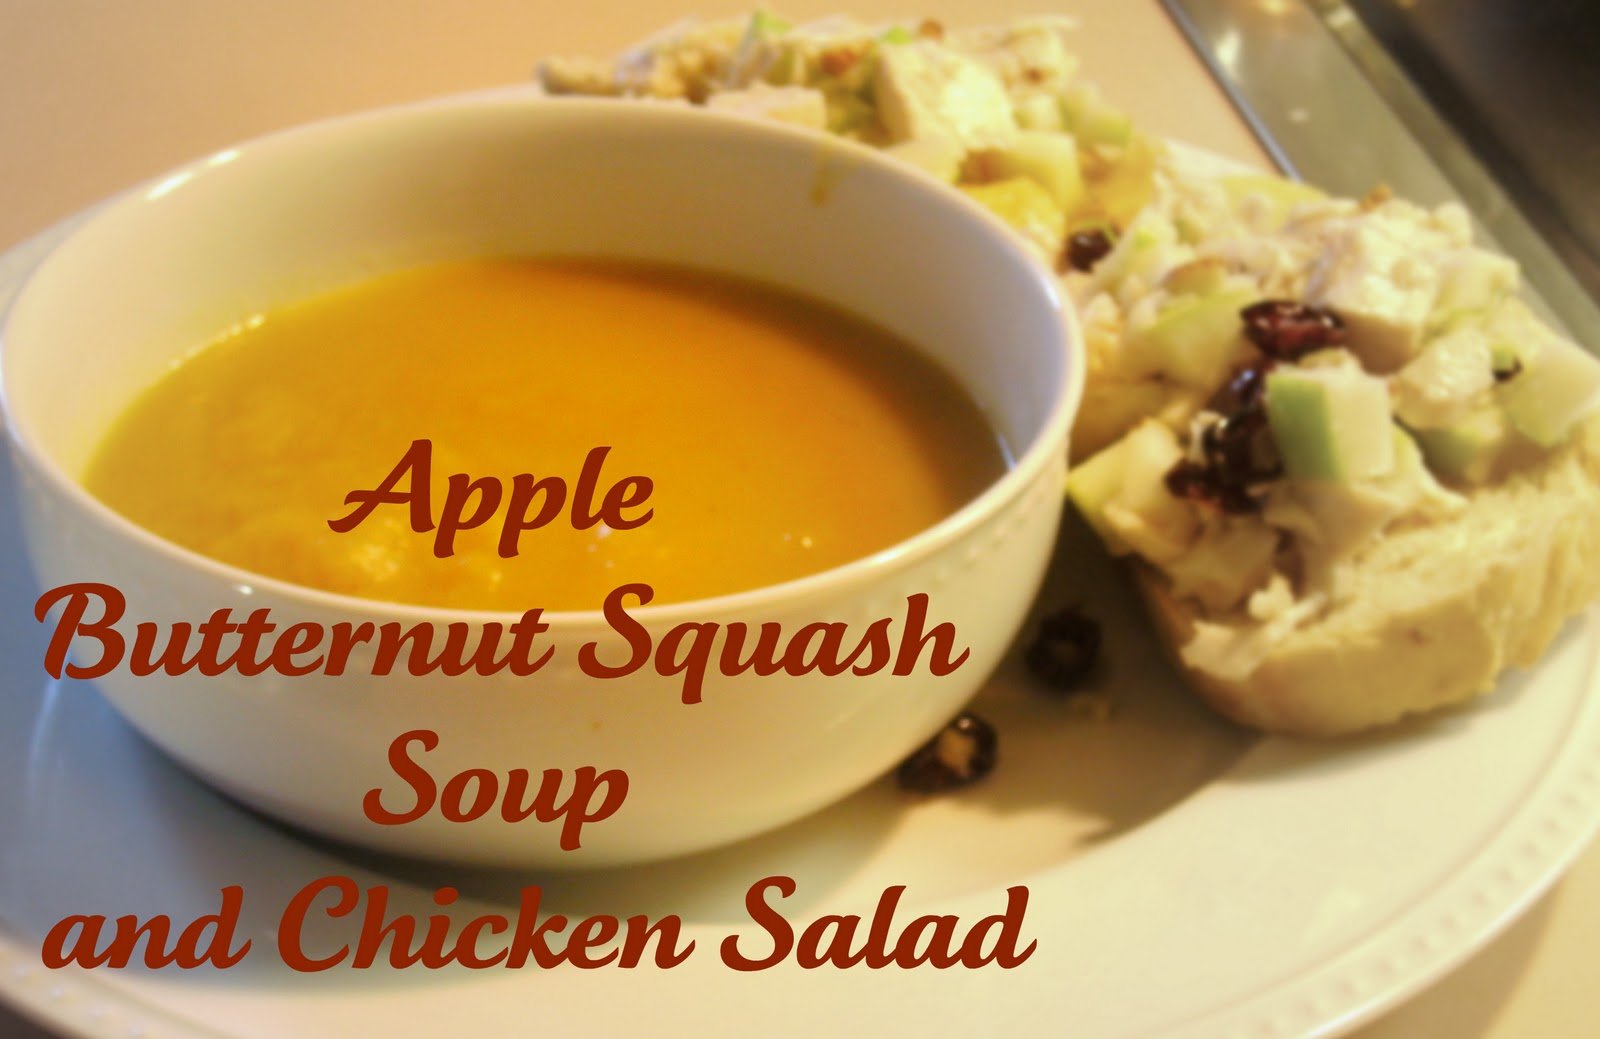 Apple Butternut Squash Soup and Chicken Salad Sandwiches.